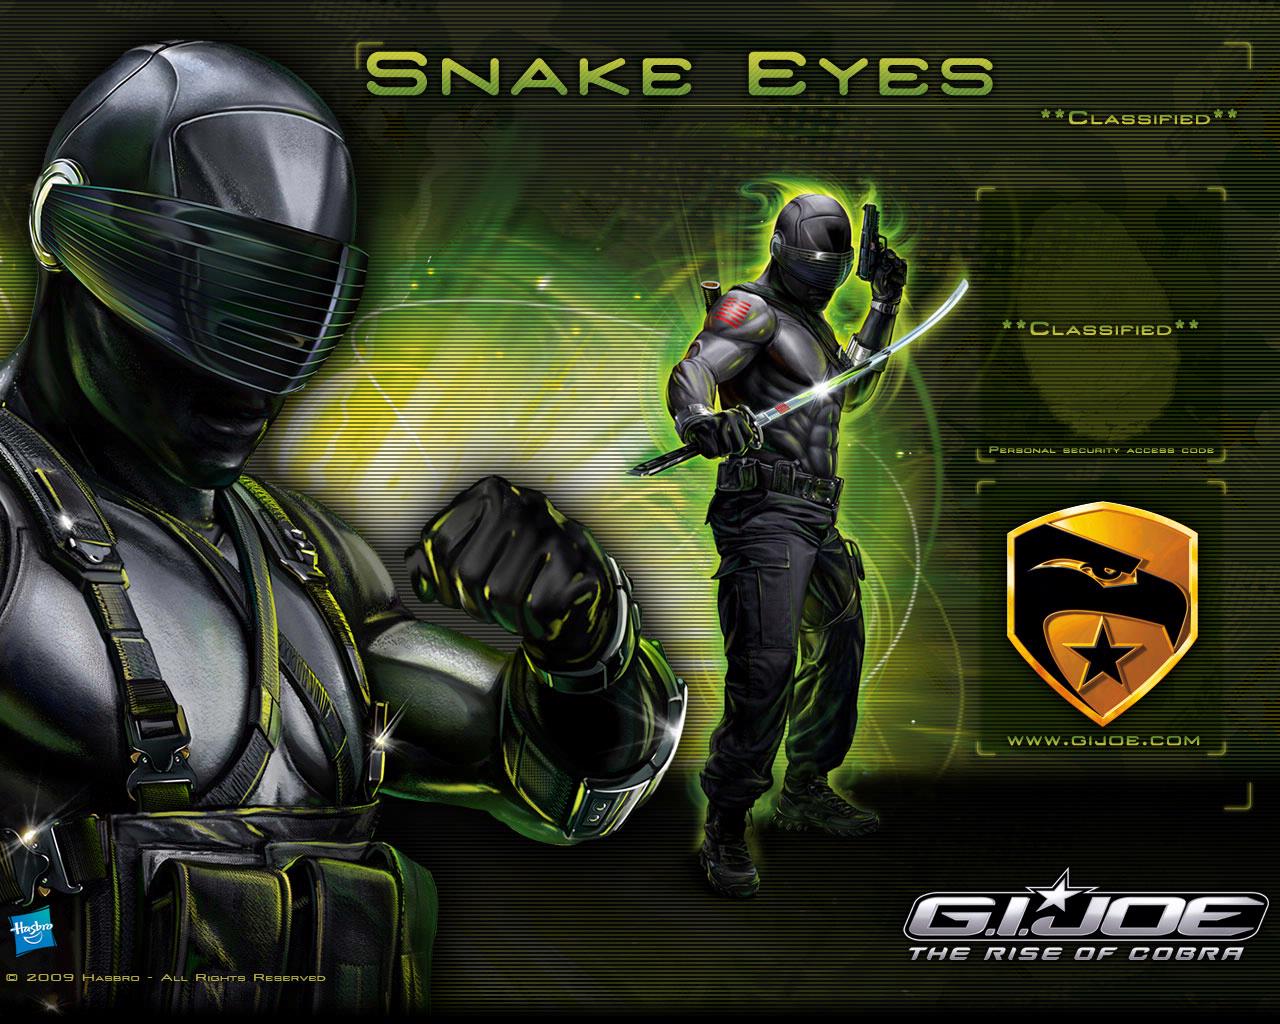 GIJoecom totally revamped for the Rise of COBRA